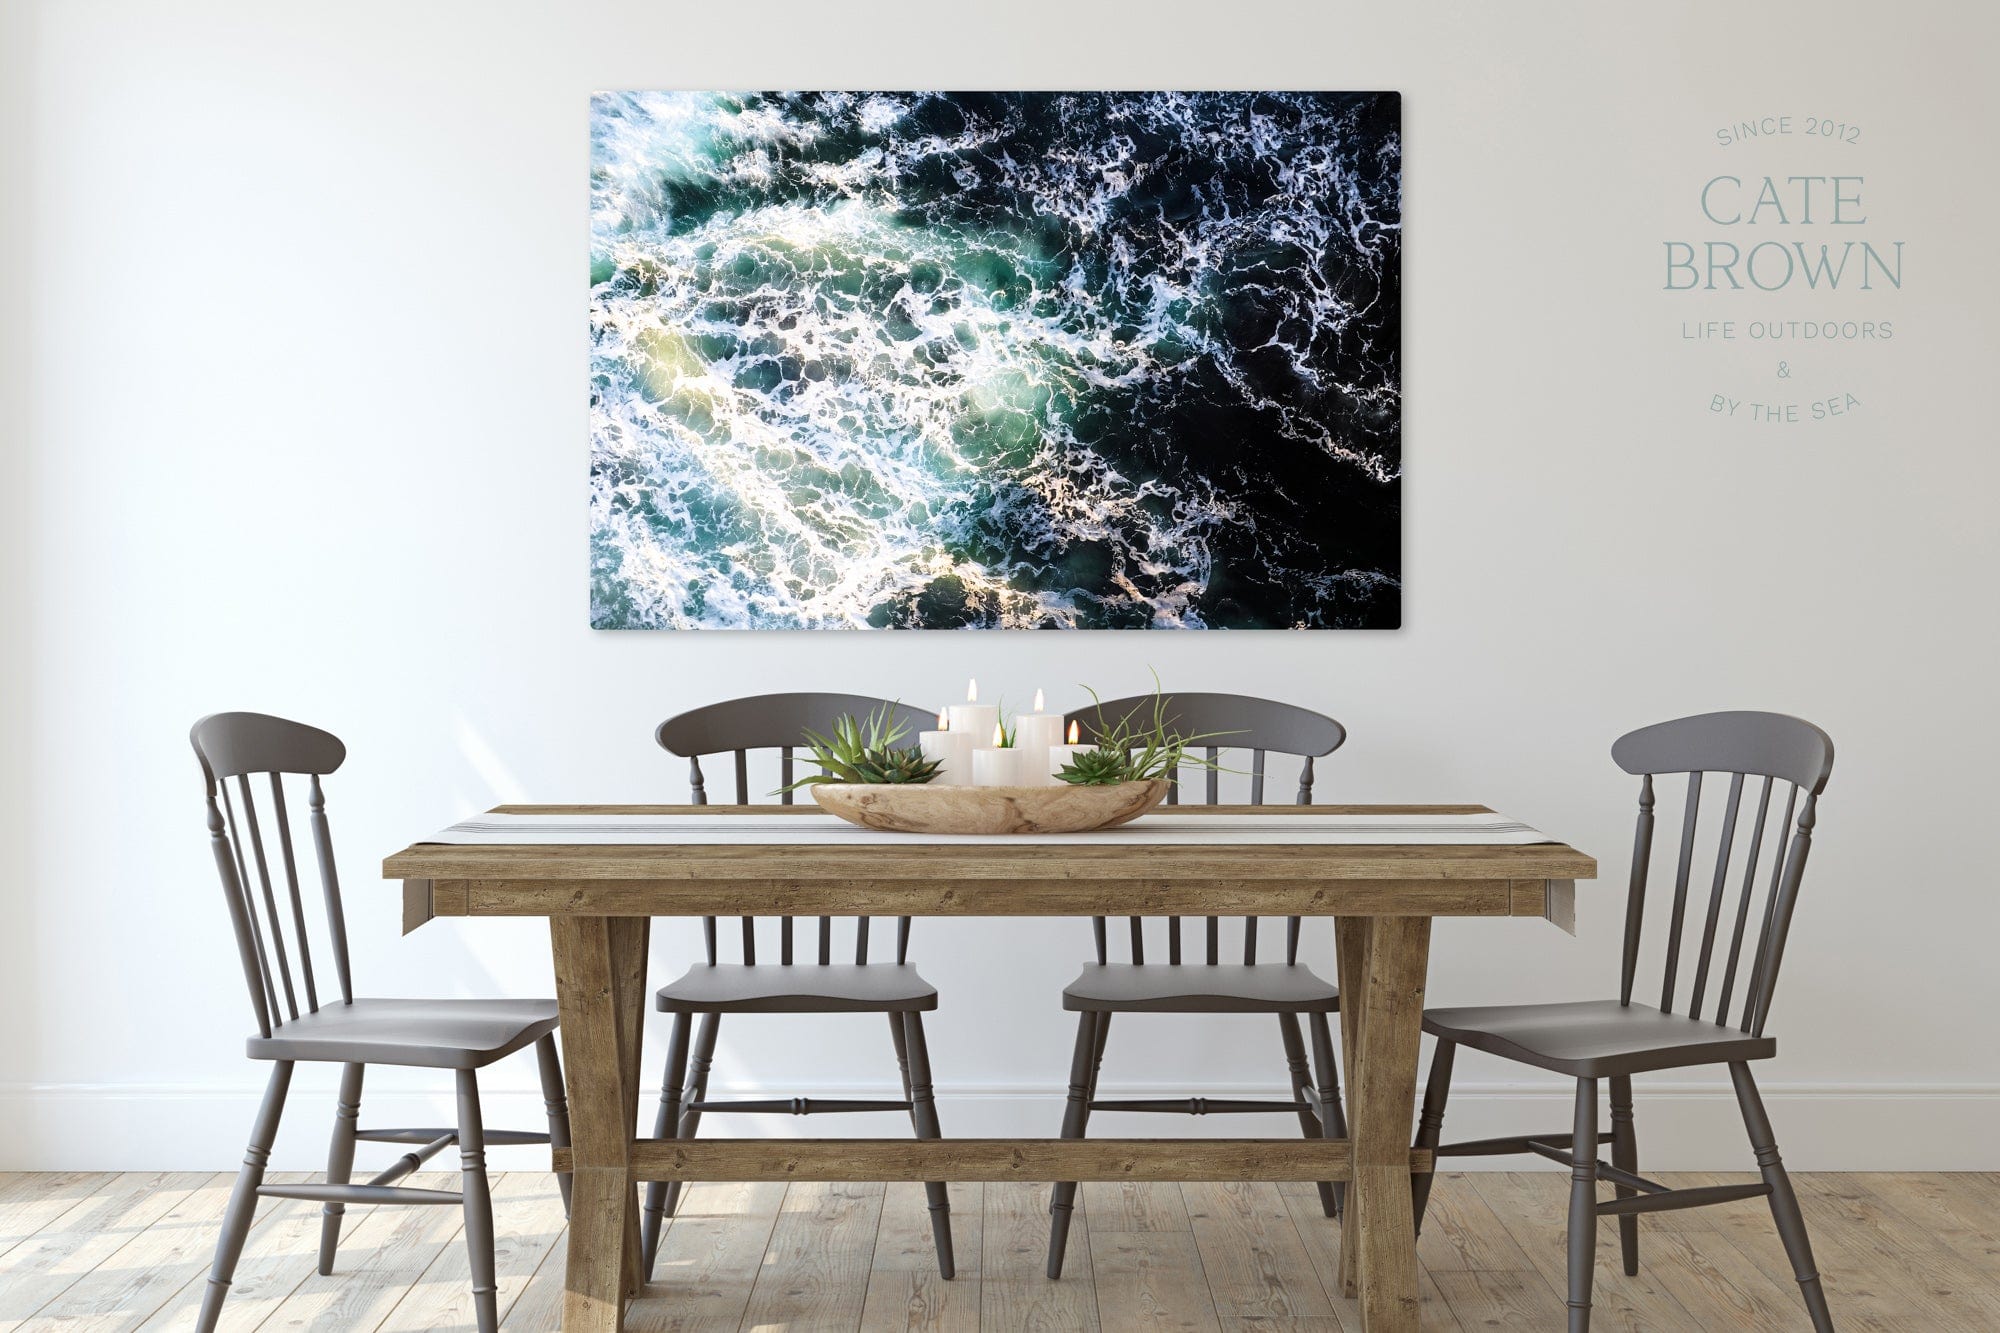 Cate Brown Photo Canvas / 16"x24" / None (Print Only) Beavertail #7  //  Aerial Photography Made to Order Ocean Fine Art